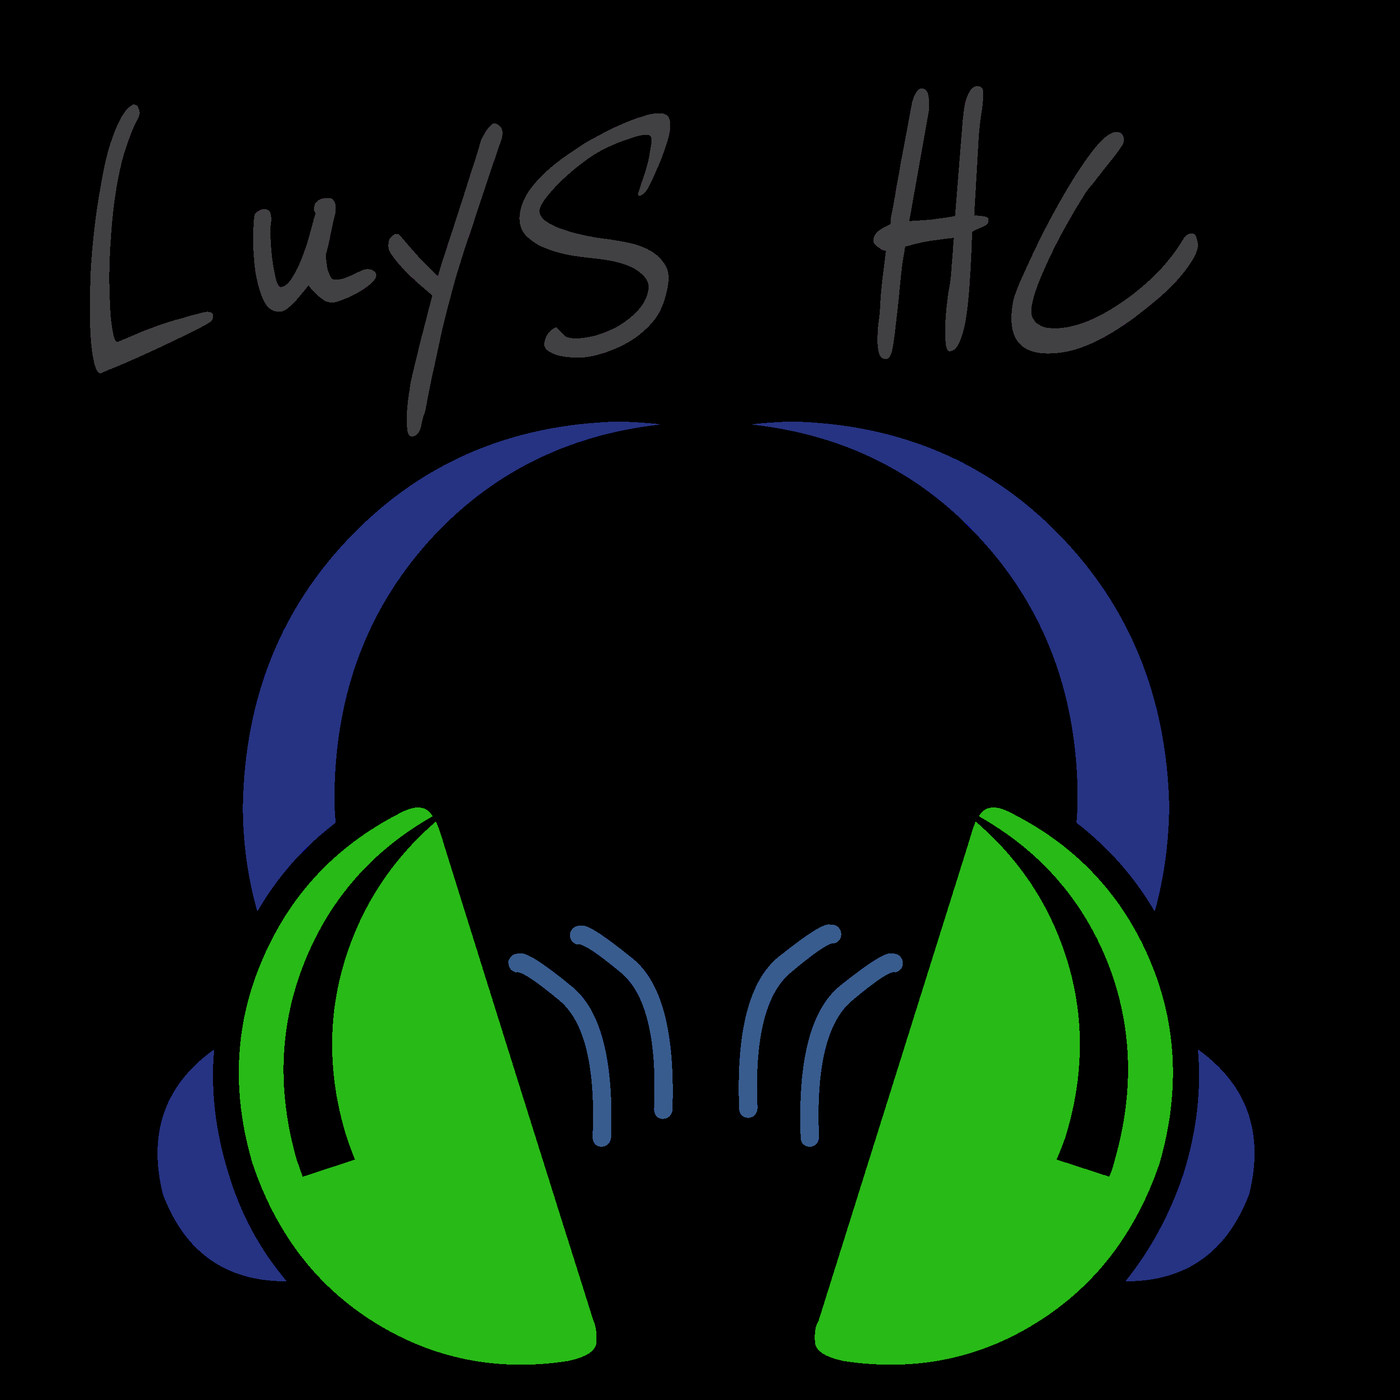 LuyS HC 15-8-19 @ Crazy Day aguacates hardparty